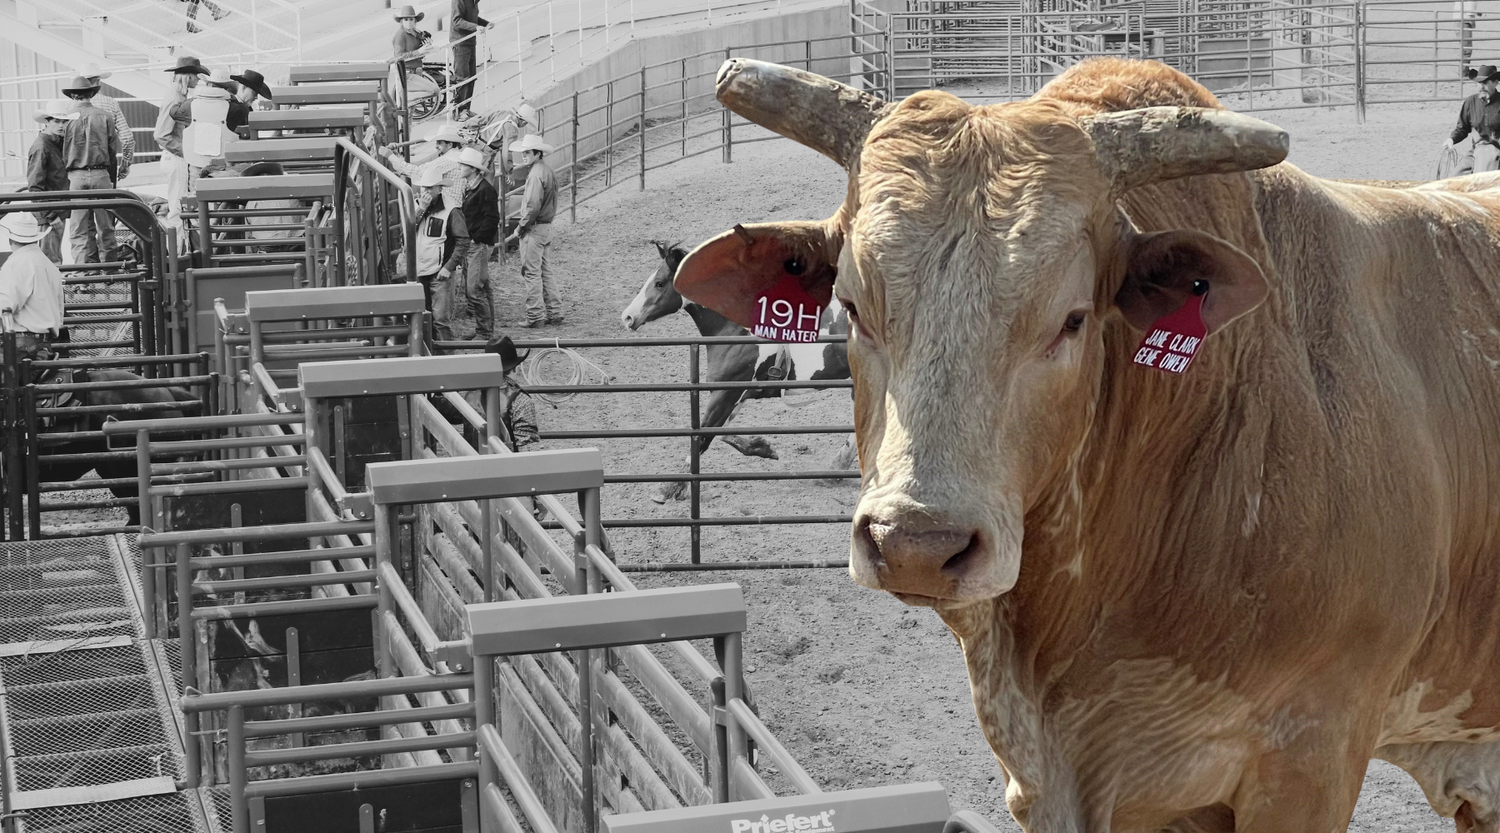 Man Hater: The Legendary Bucking Bull Dominating the Arena